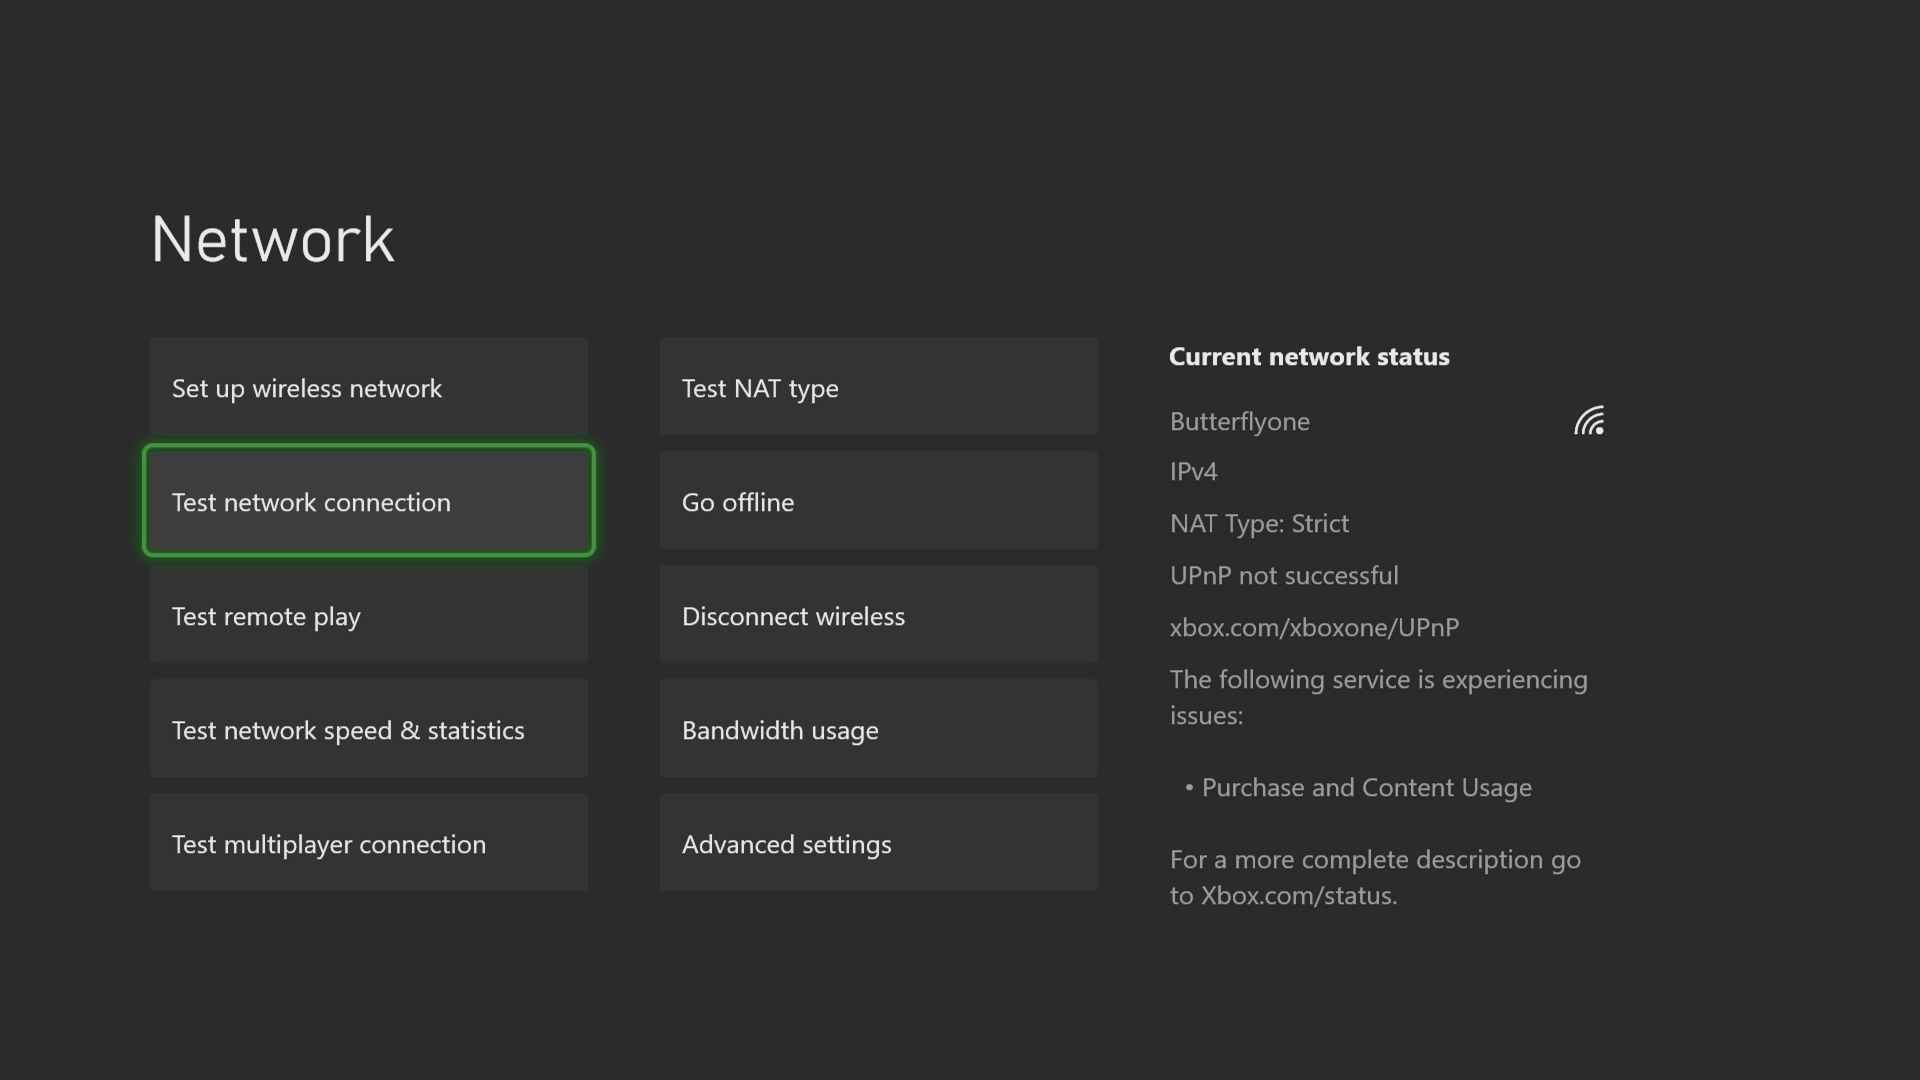 Select Test network connection